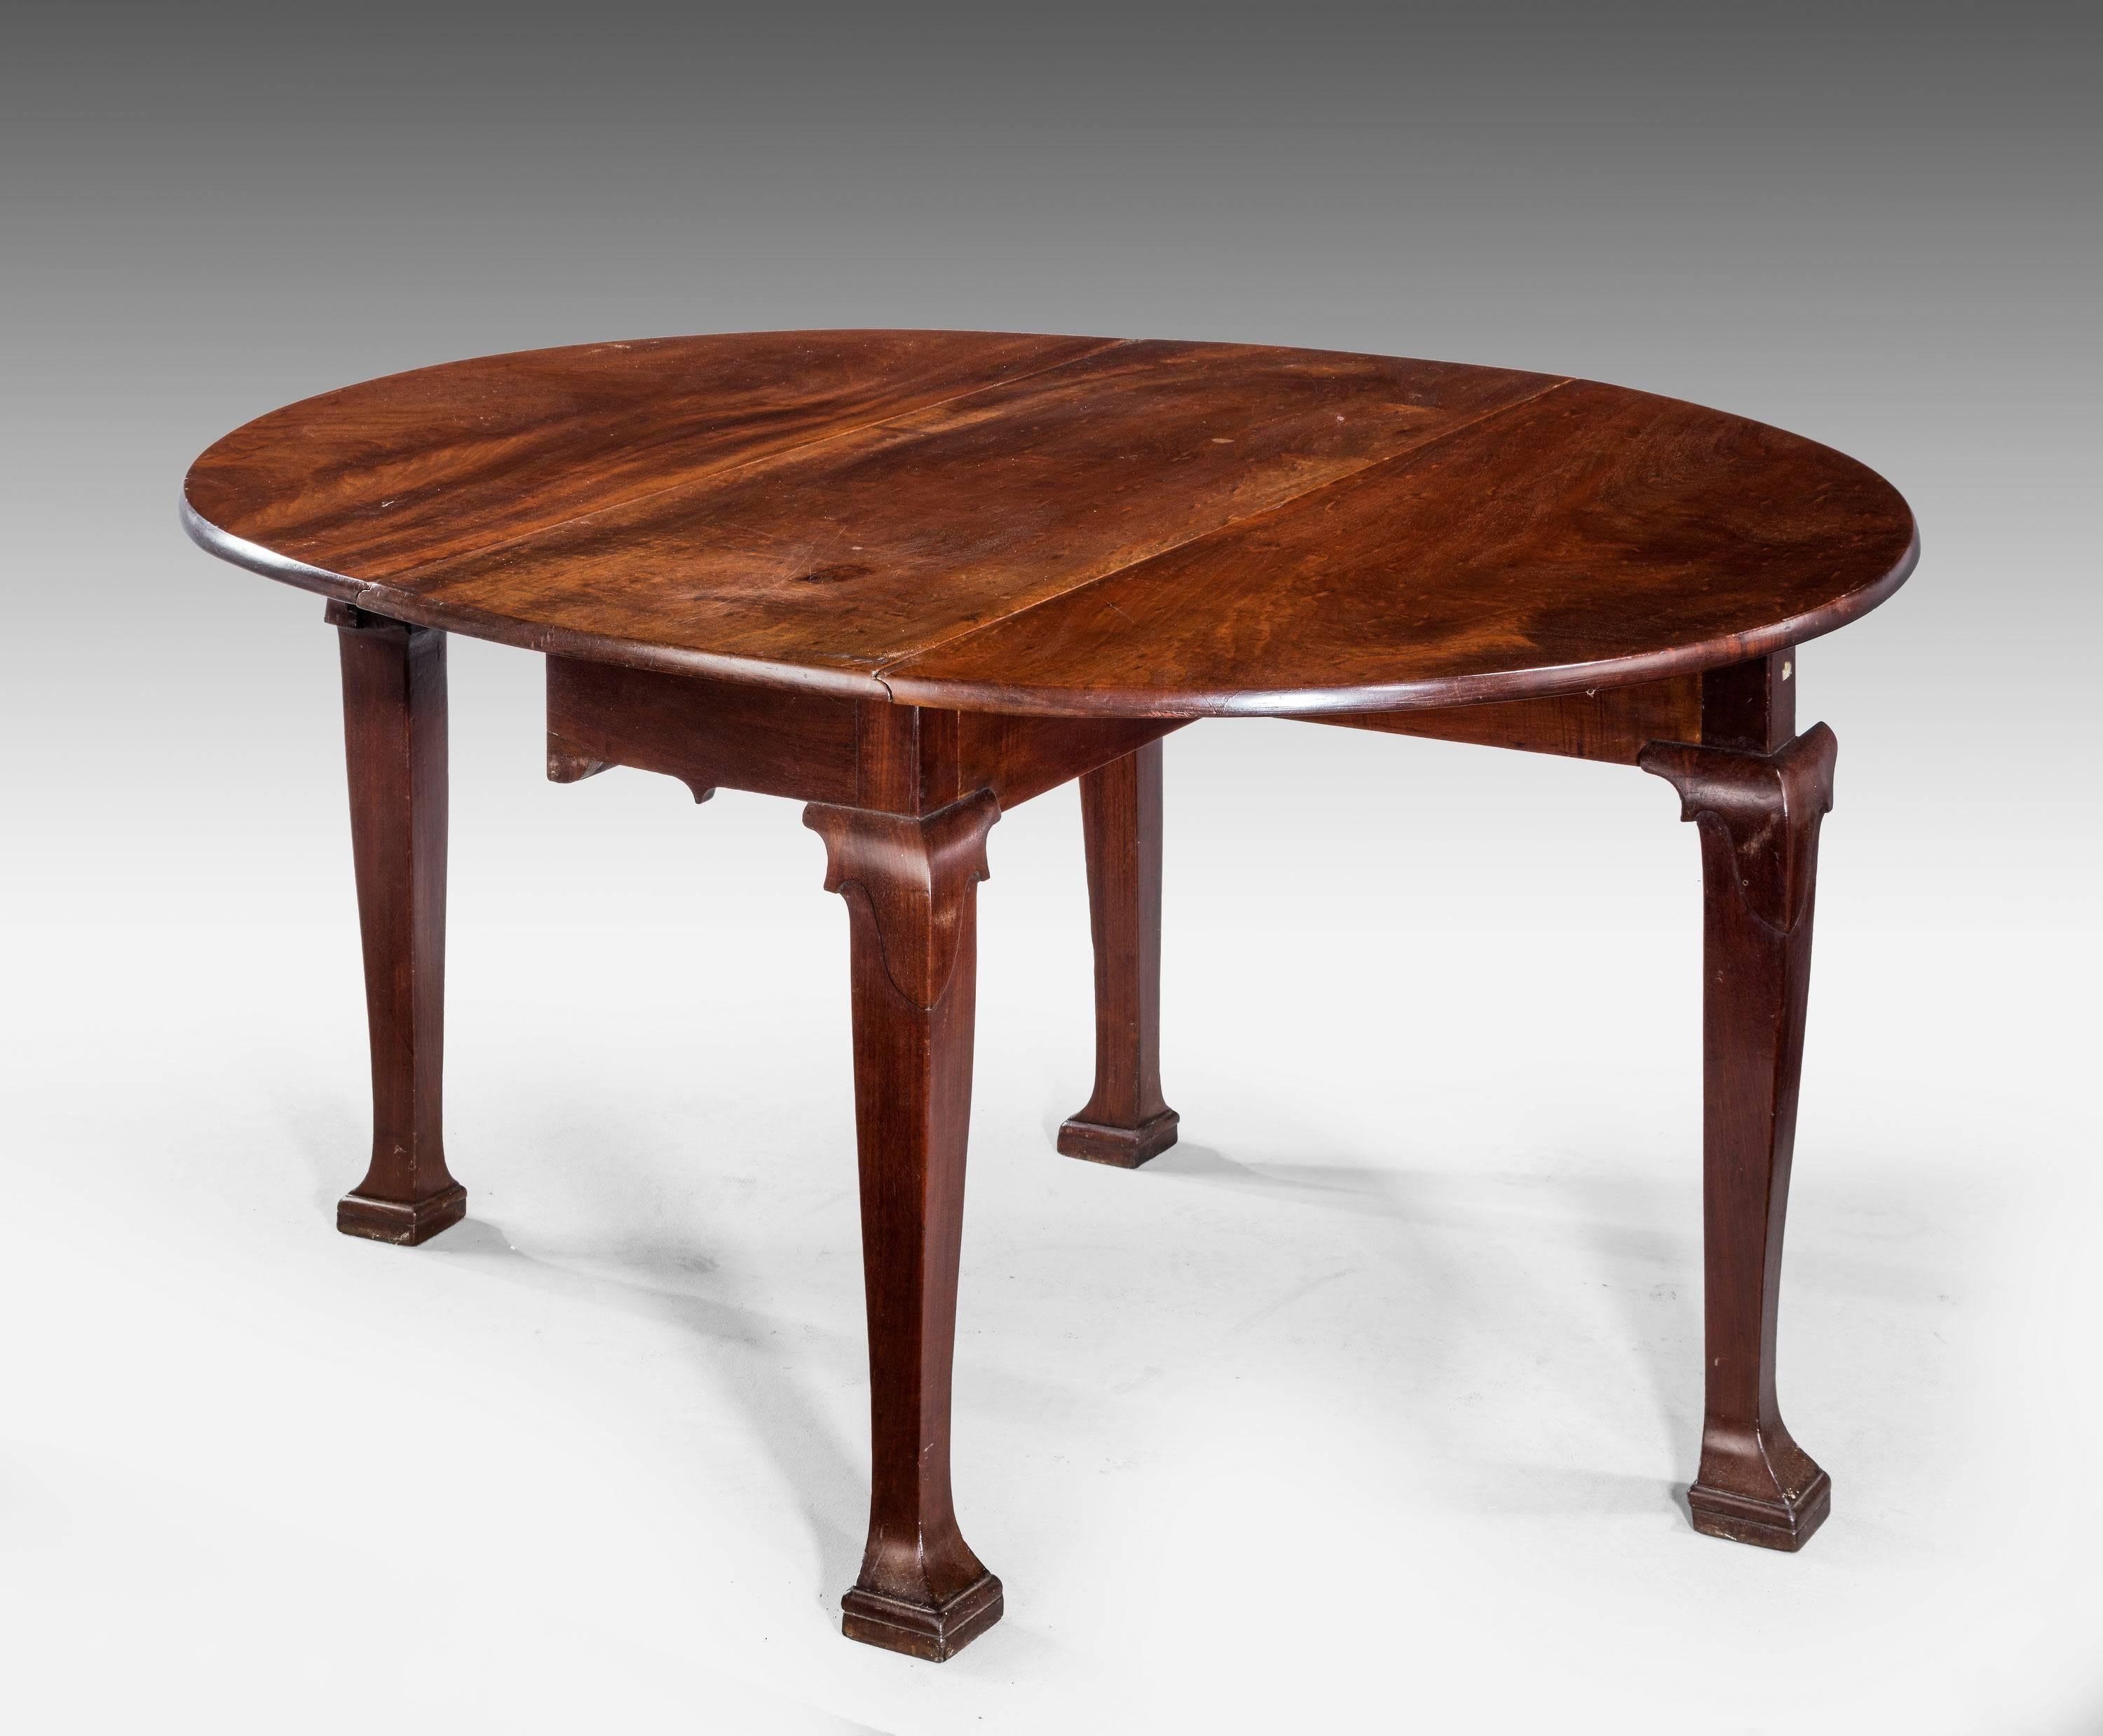 Great Britain (UK) Late 18th Century Oval Drop-Leaf Table